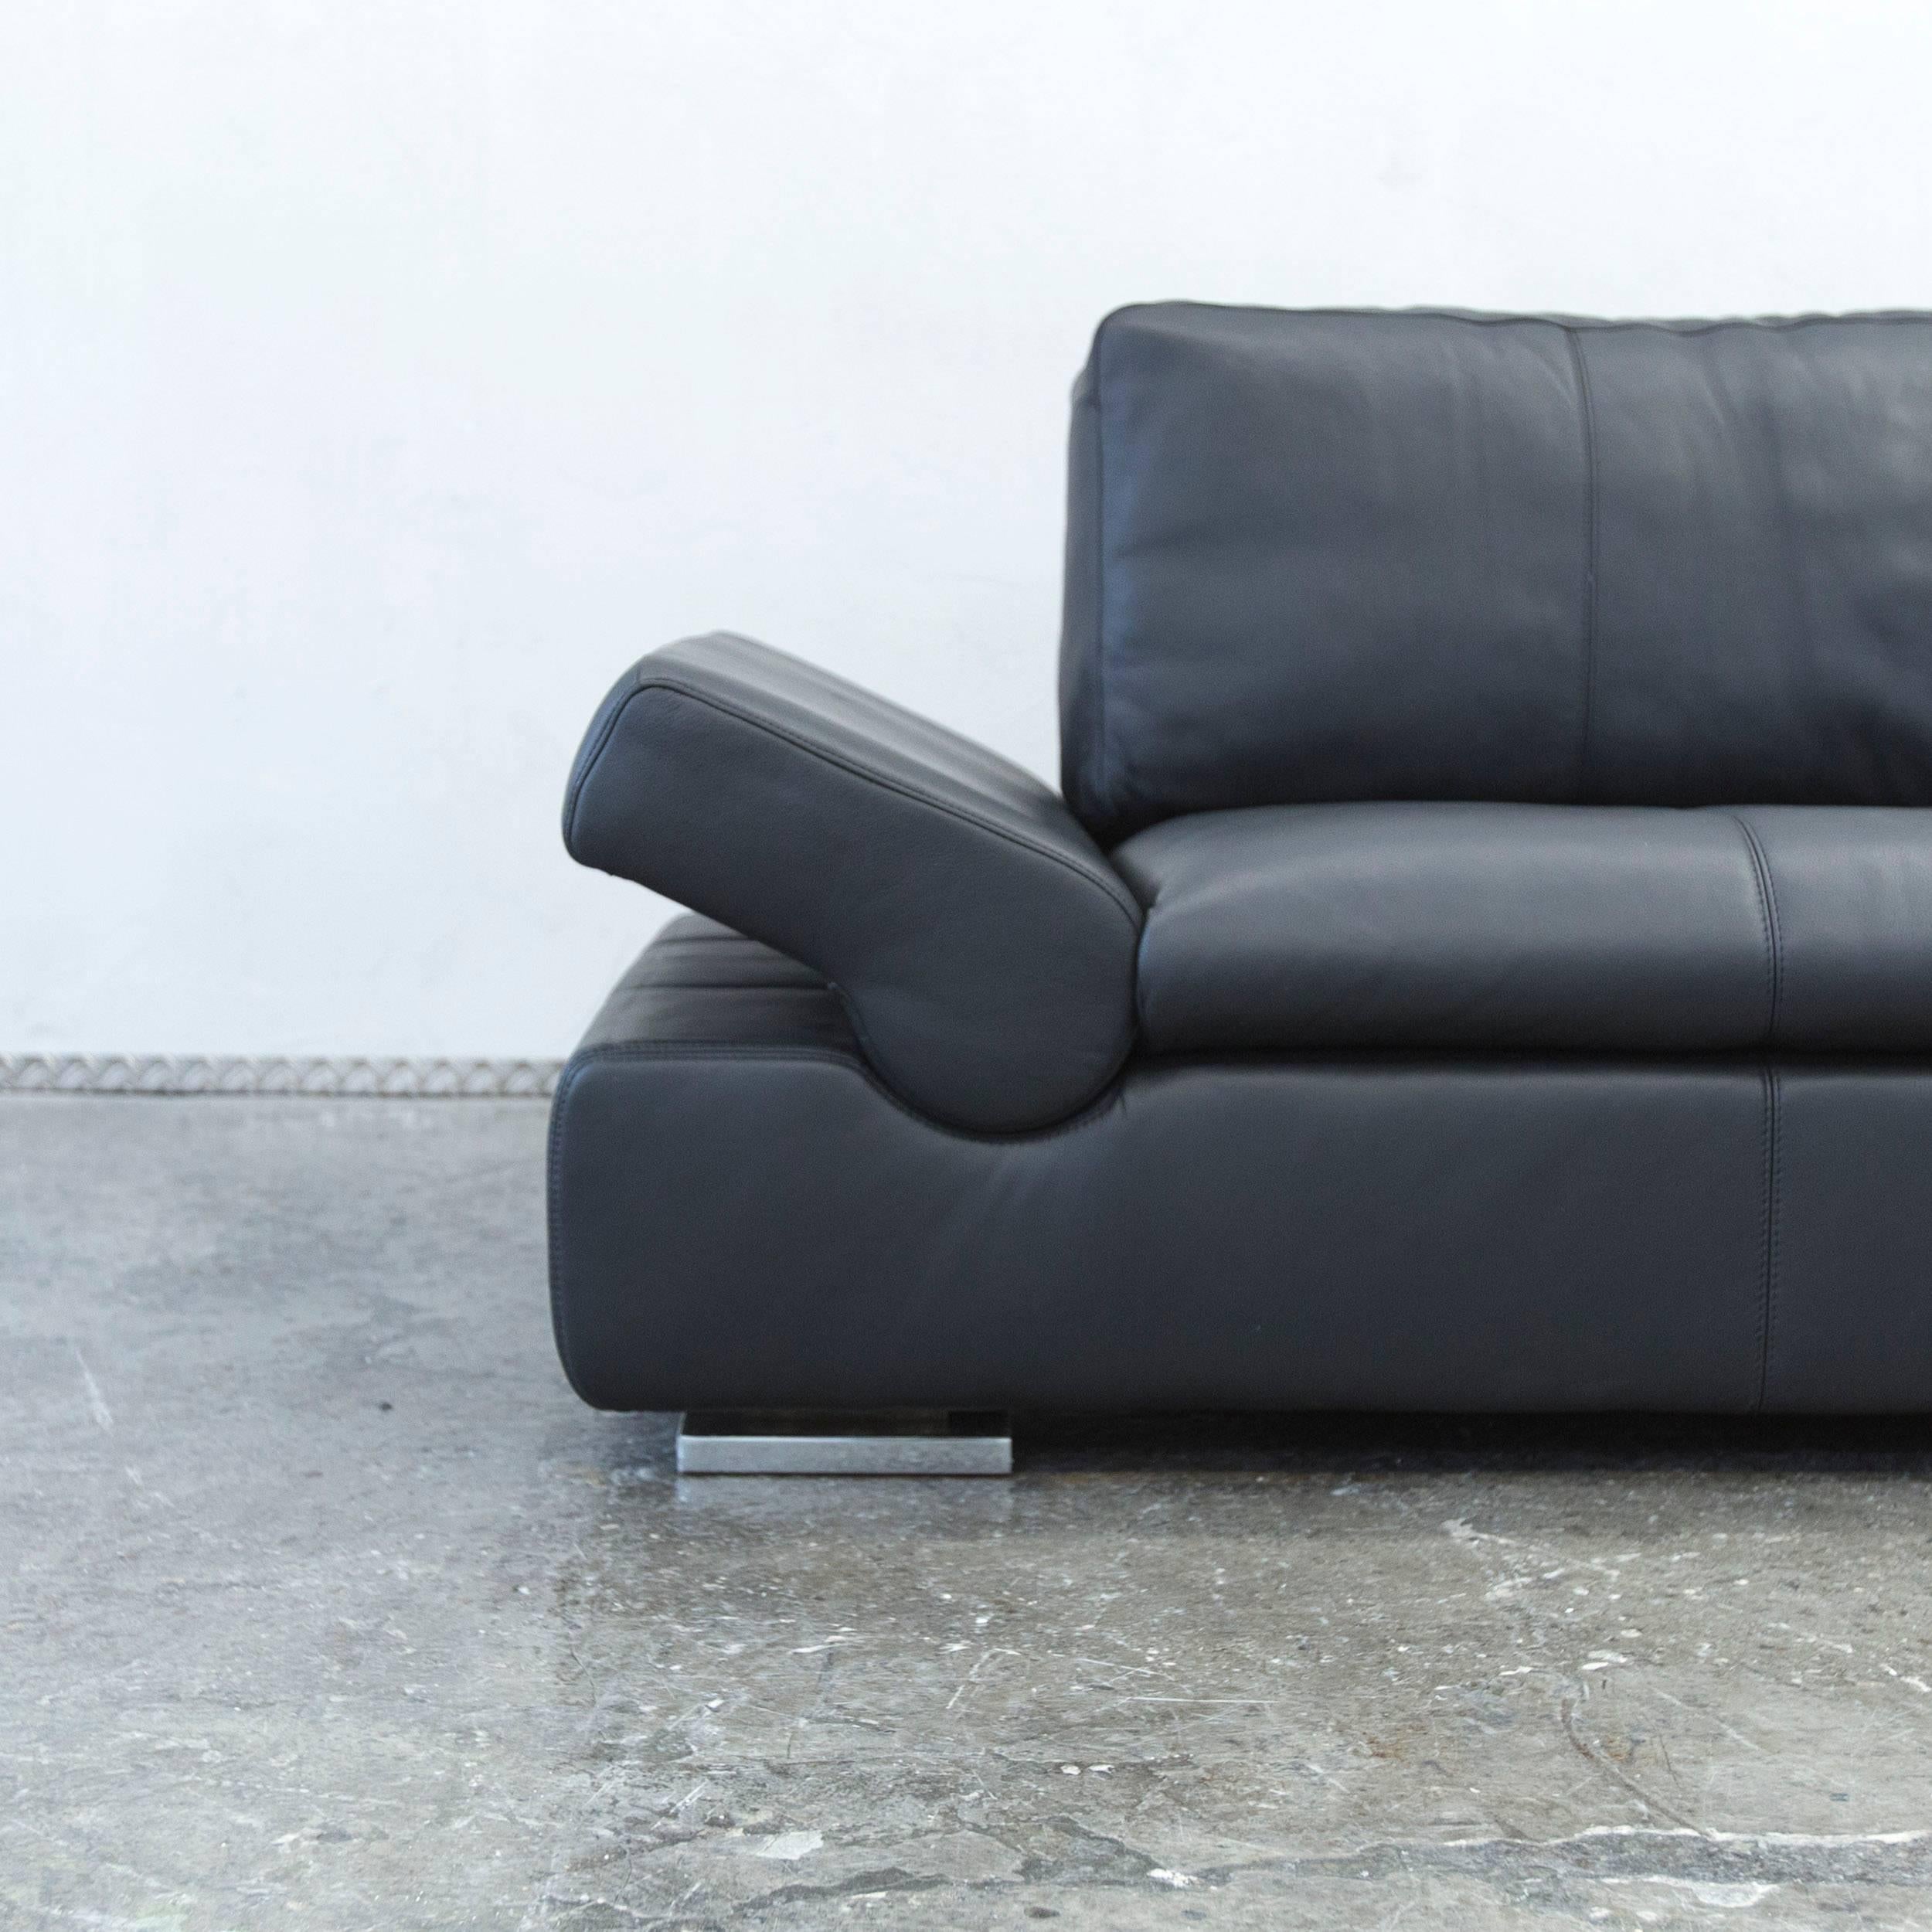 Black colored original Musterring Linea designer leather sofa with various convenient functions, designed to provide pure comfort.